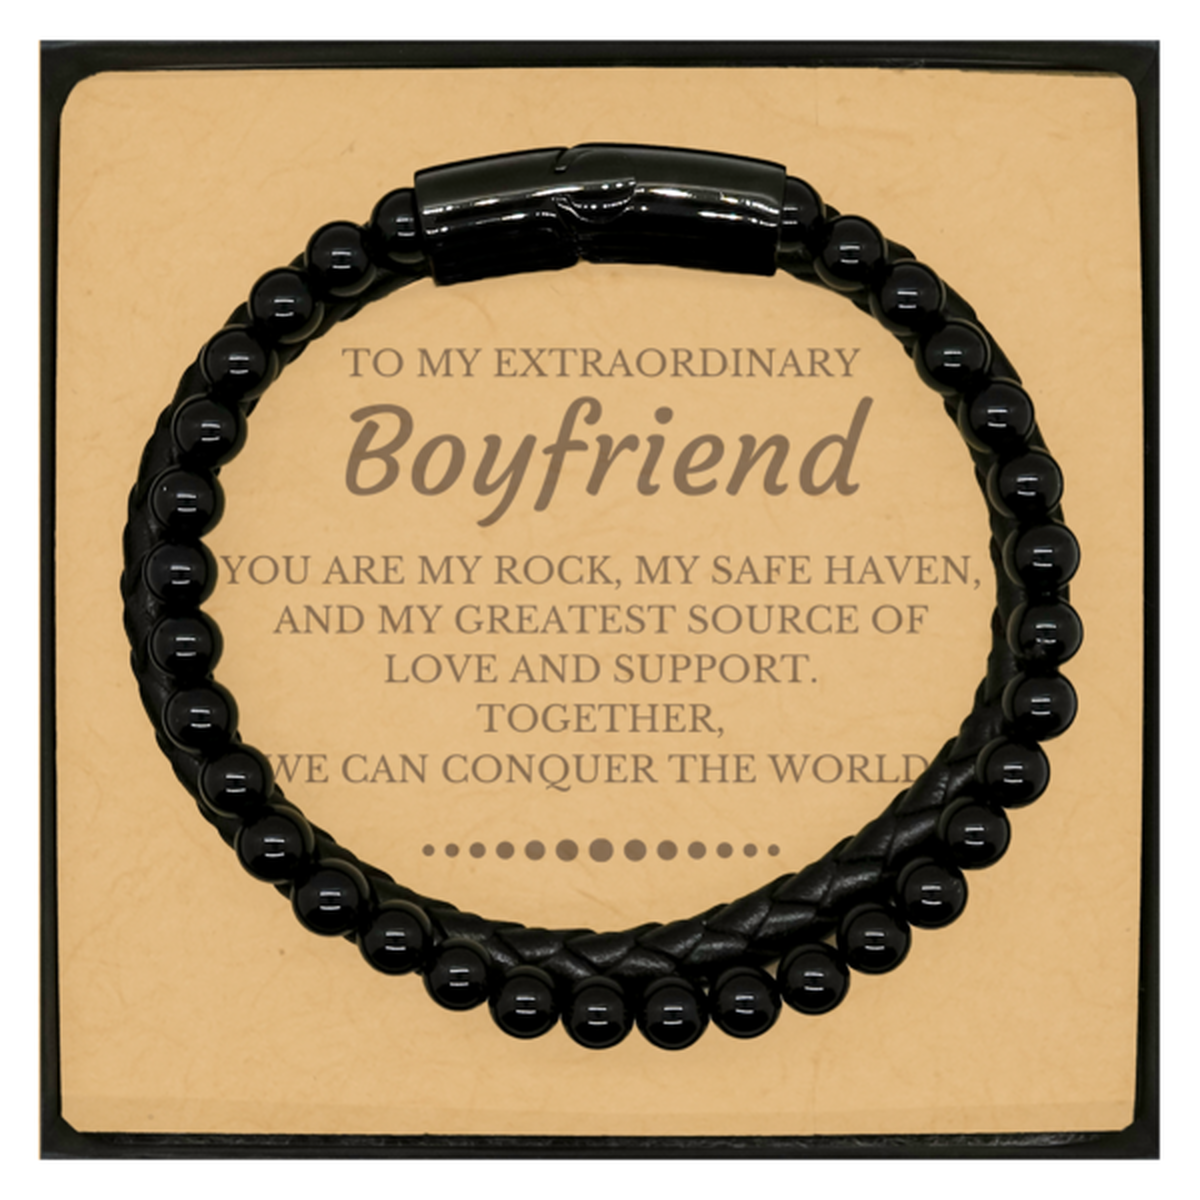 To My Extraordinary Boyfriend Gifts, Together, we can conquer the world, Birthday Christmas Stone Leather Bracelets For Boyfriend, Christmas Gifts For Boyfriend